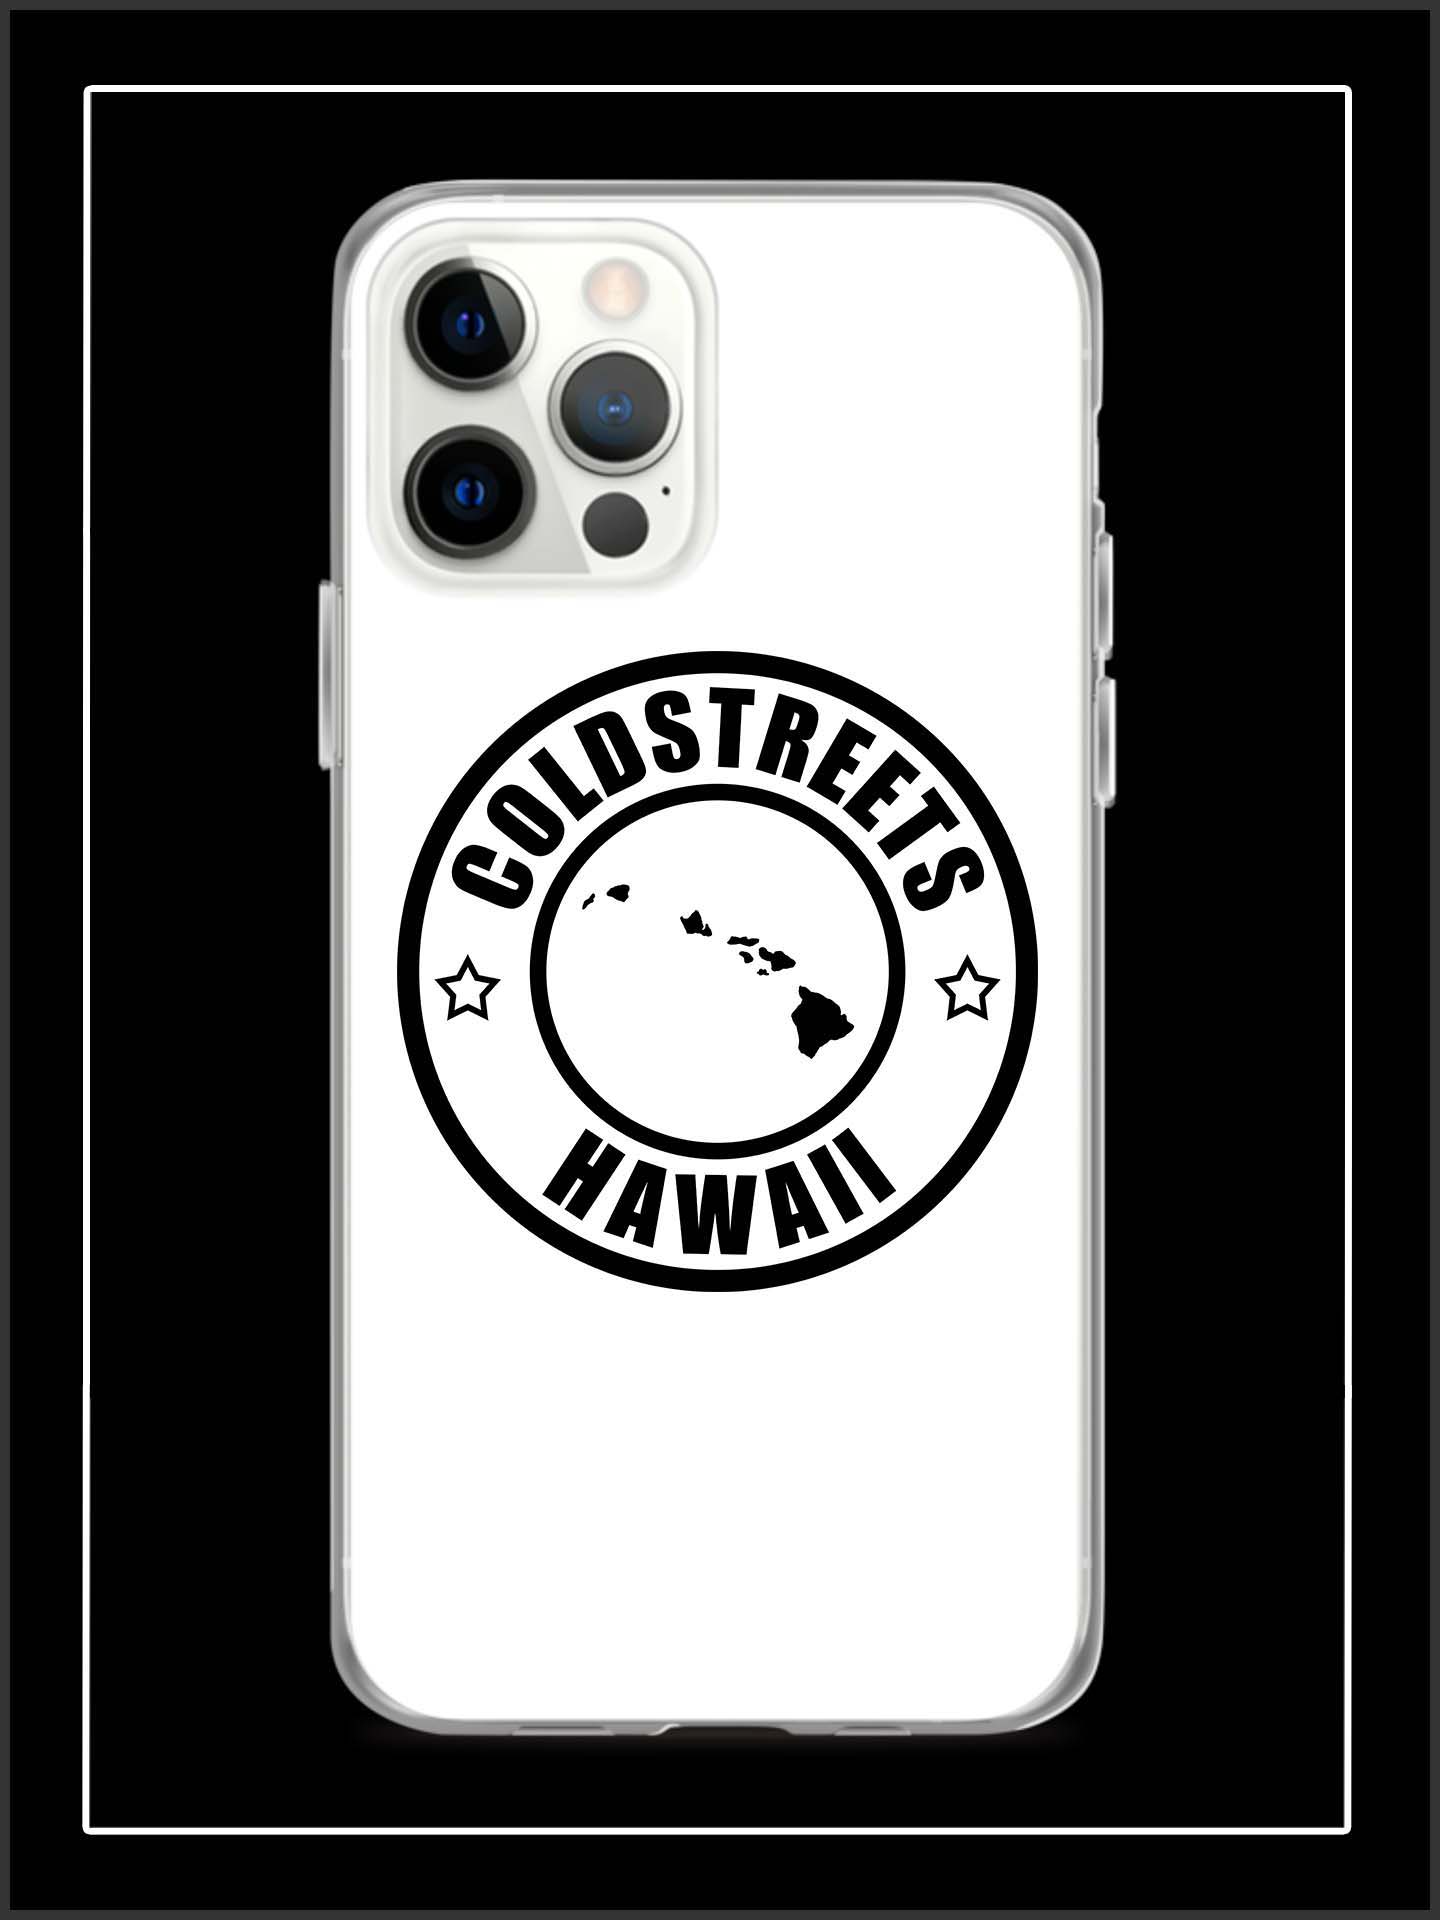 Cold Streets Hawaii iPhone Cases